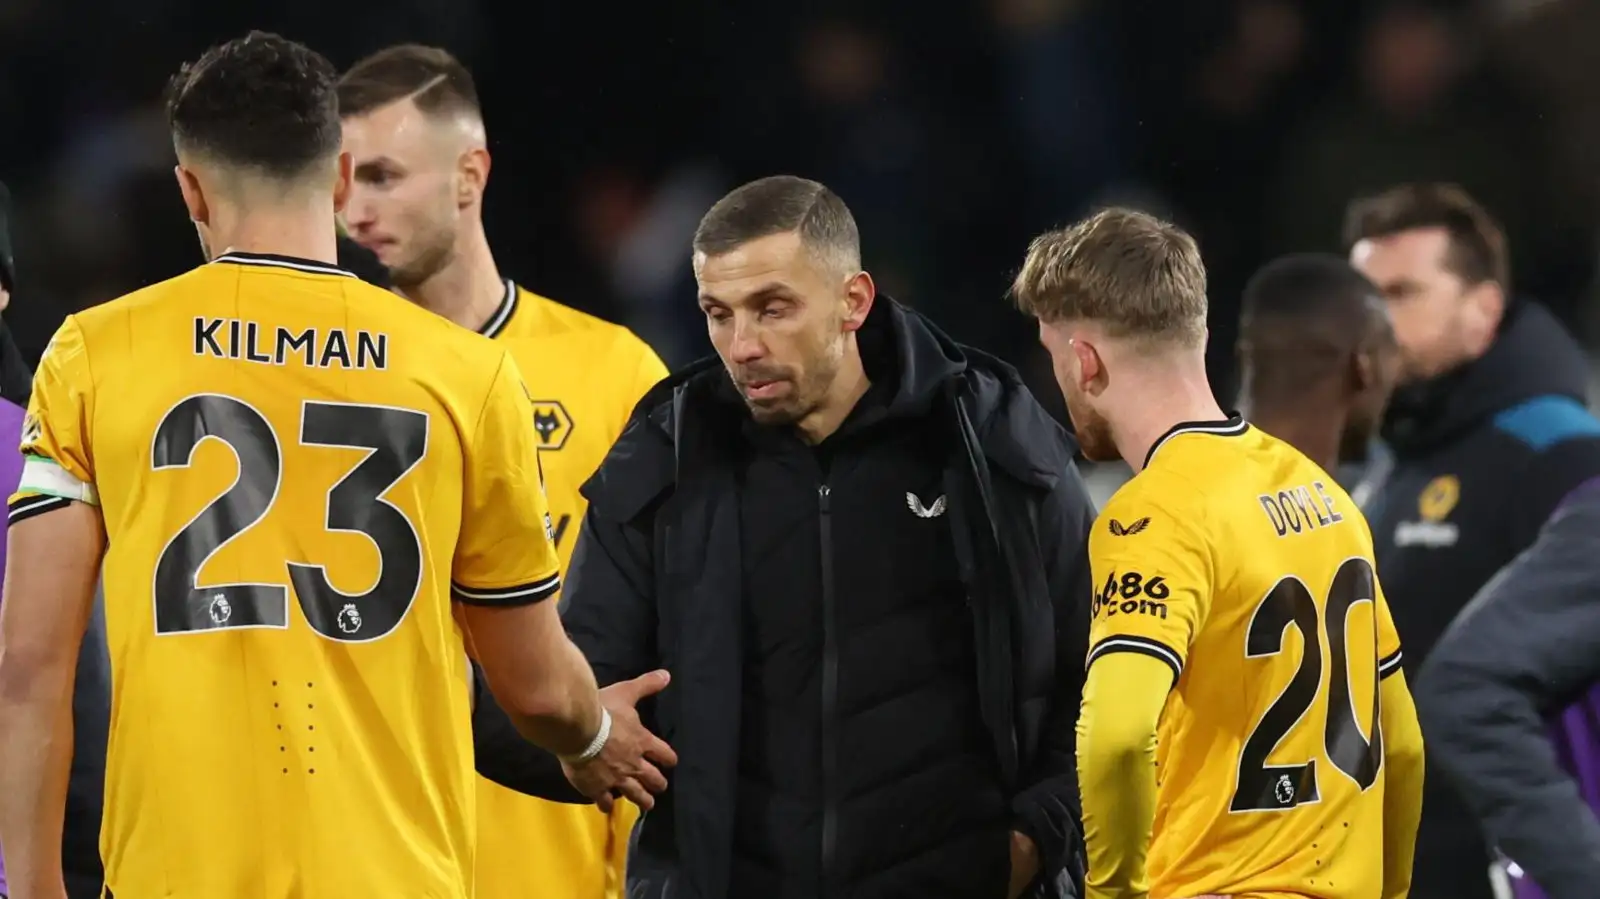 O'Neil is spouting nonsense on VAR - even if Wolves' dossier of complaints puts rivals to shame